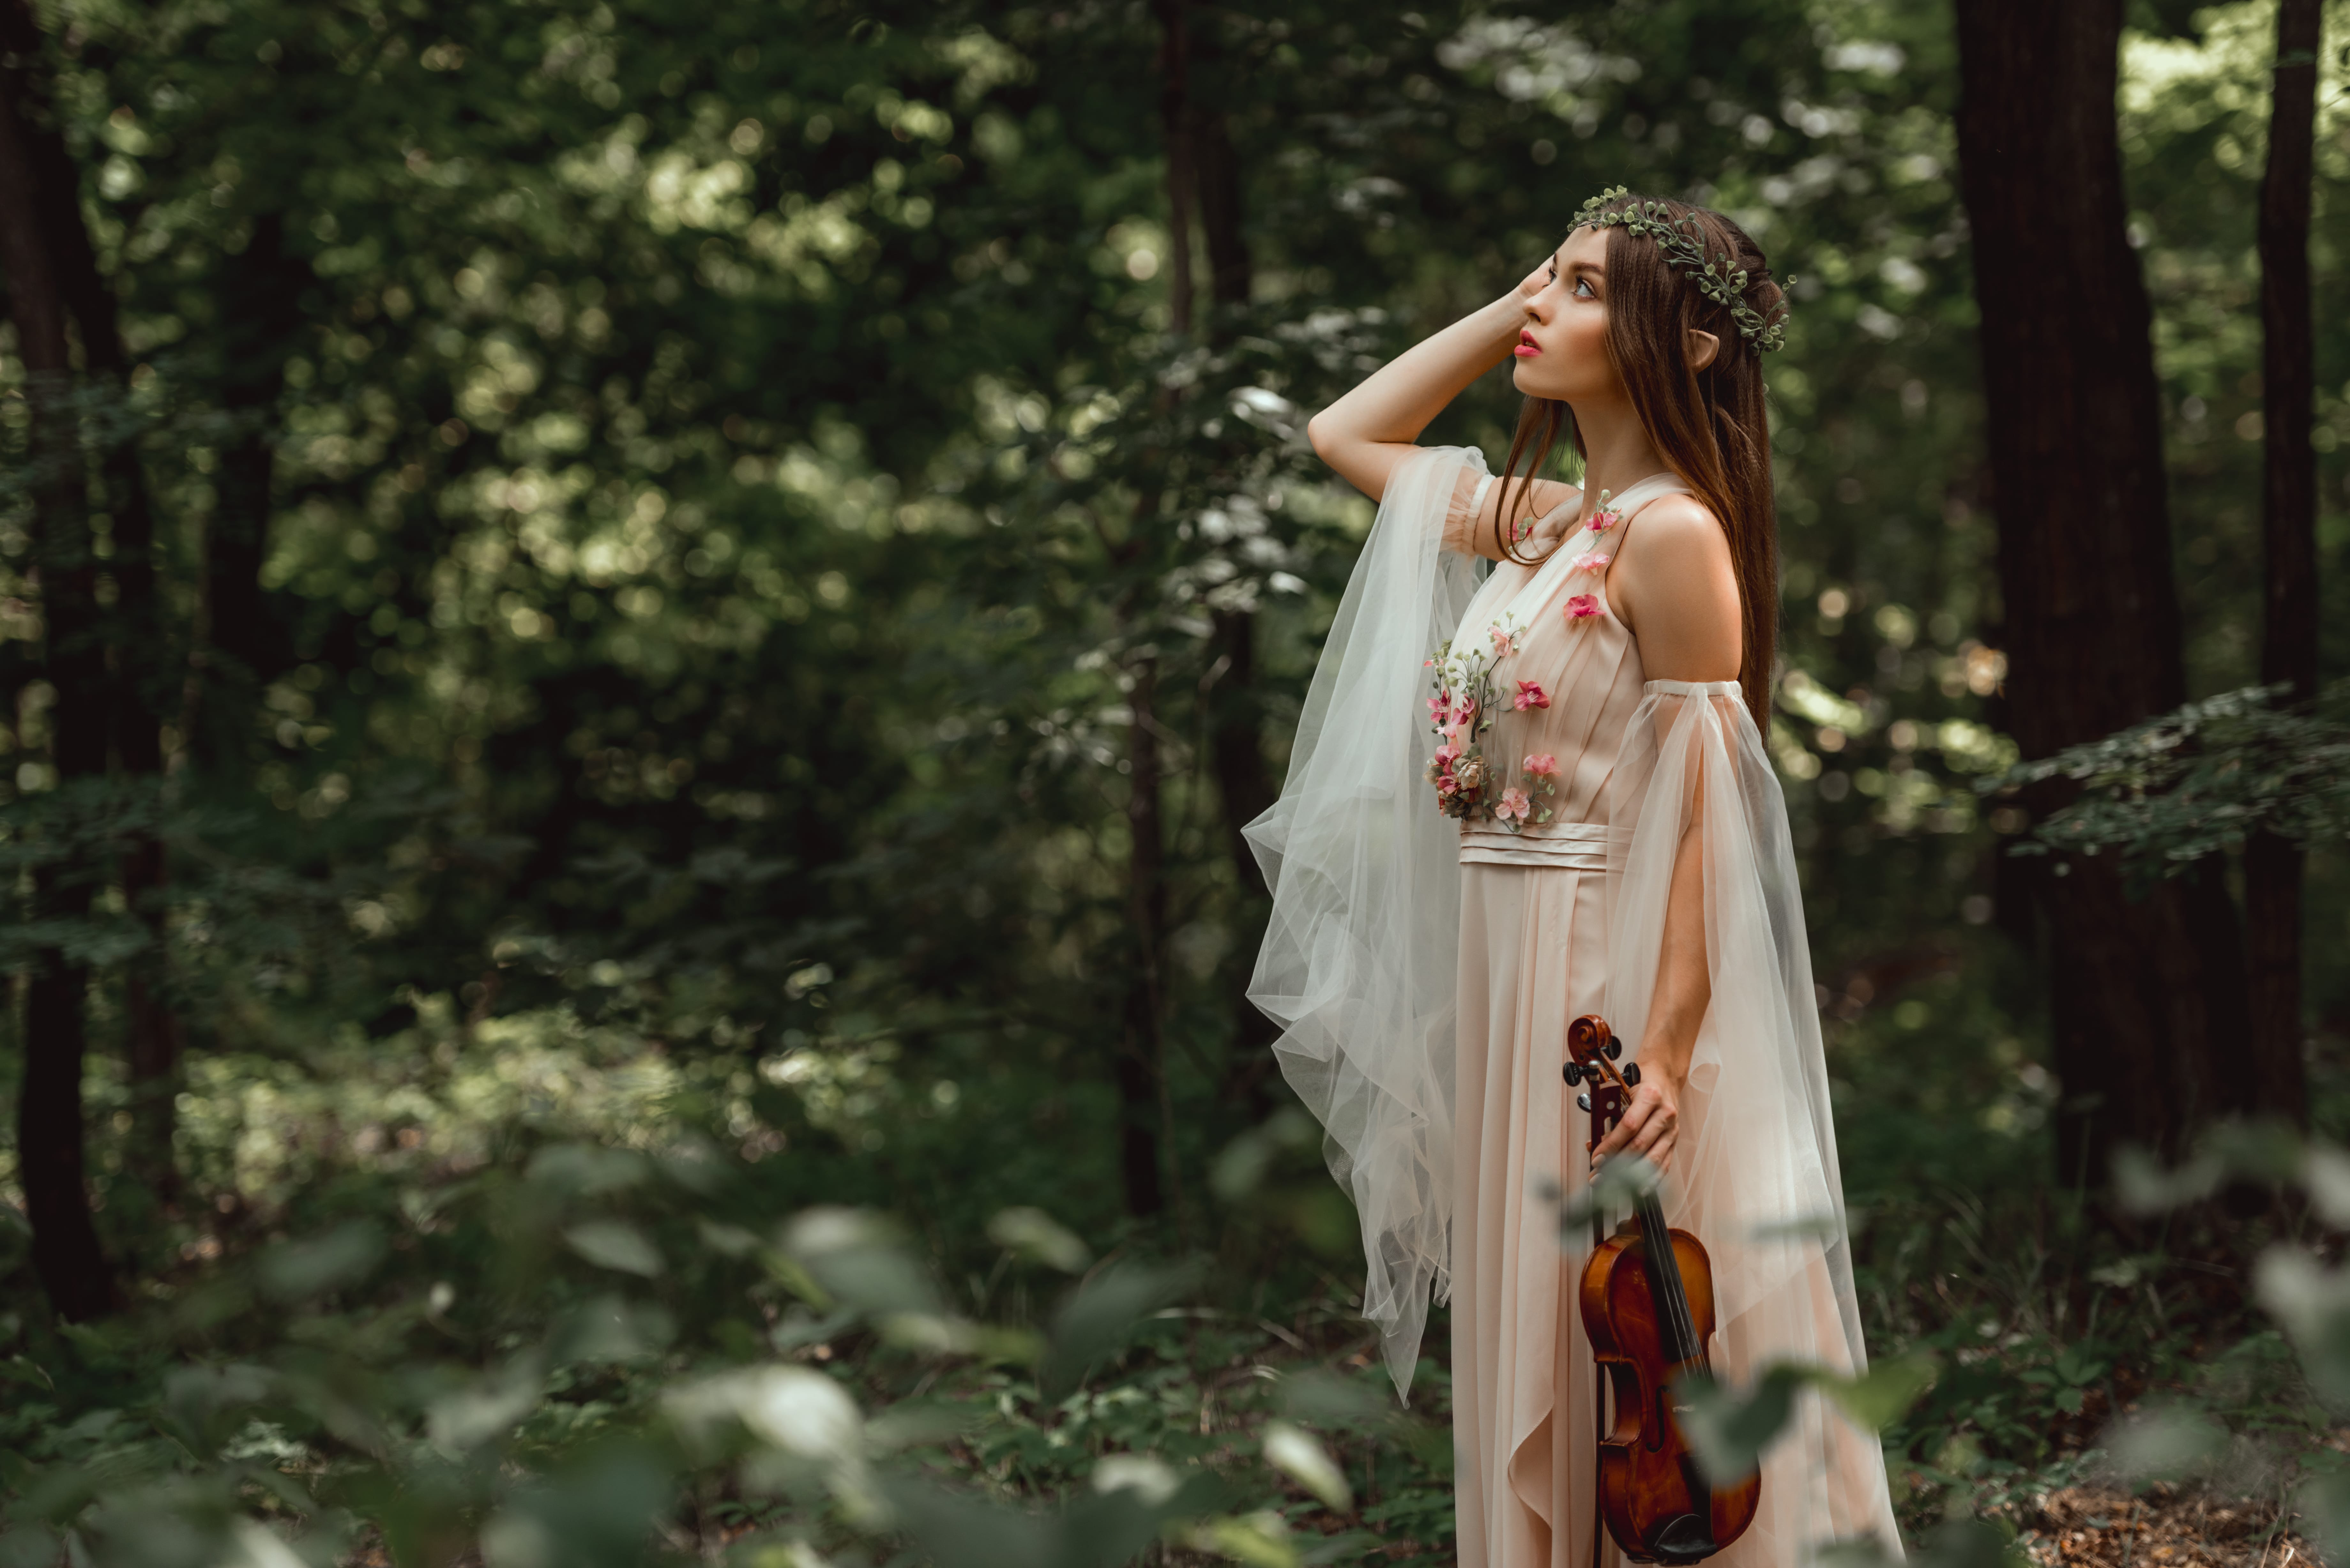 mystic fairytale character in flower dress holding violin in green forest